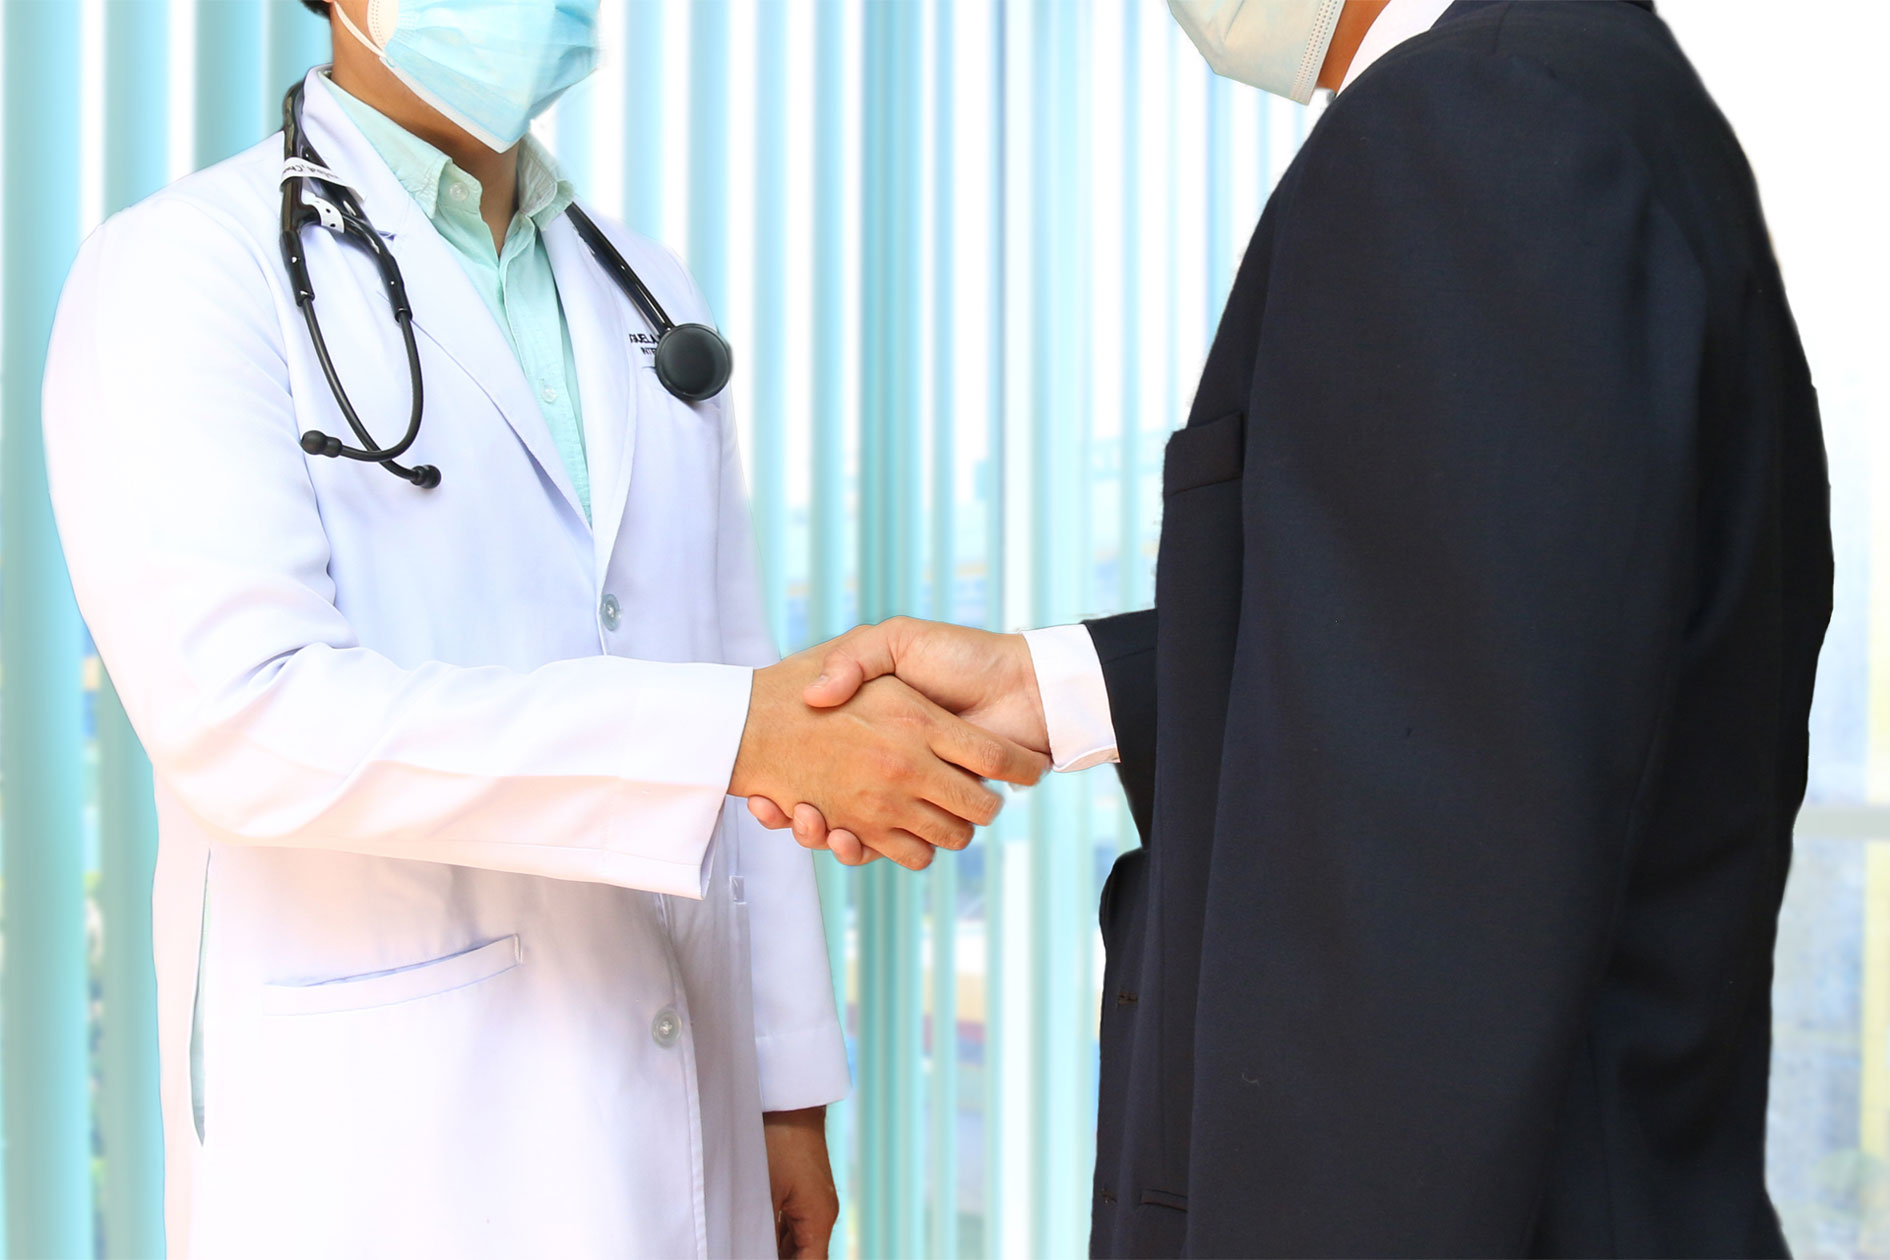 Administrative leader in a suit shakes hands with a clinician.